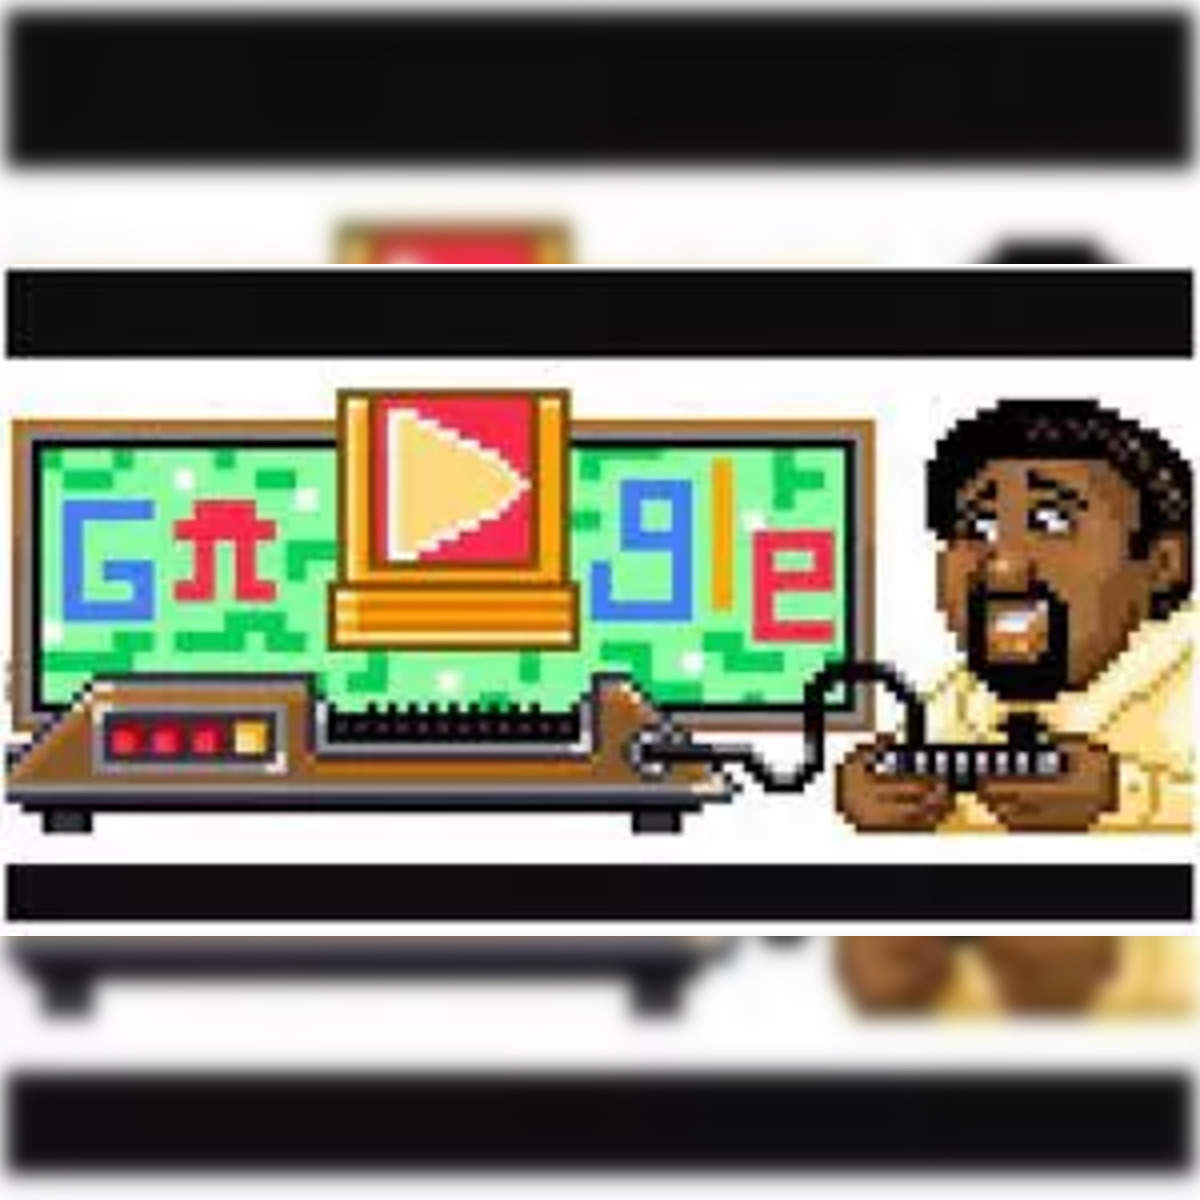 It's Google's 25th birthday: The Top 10 Doodle games you can play